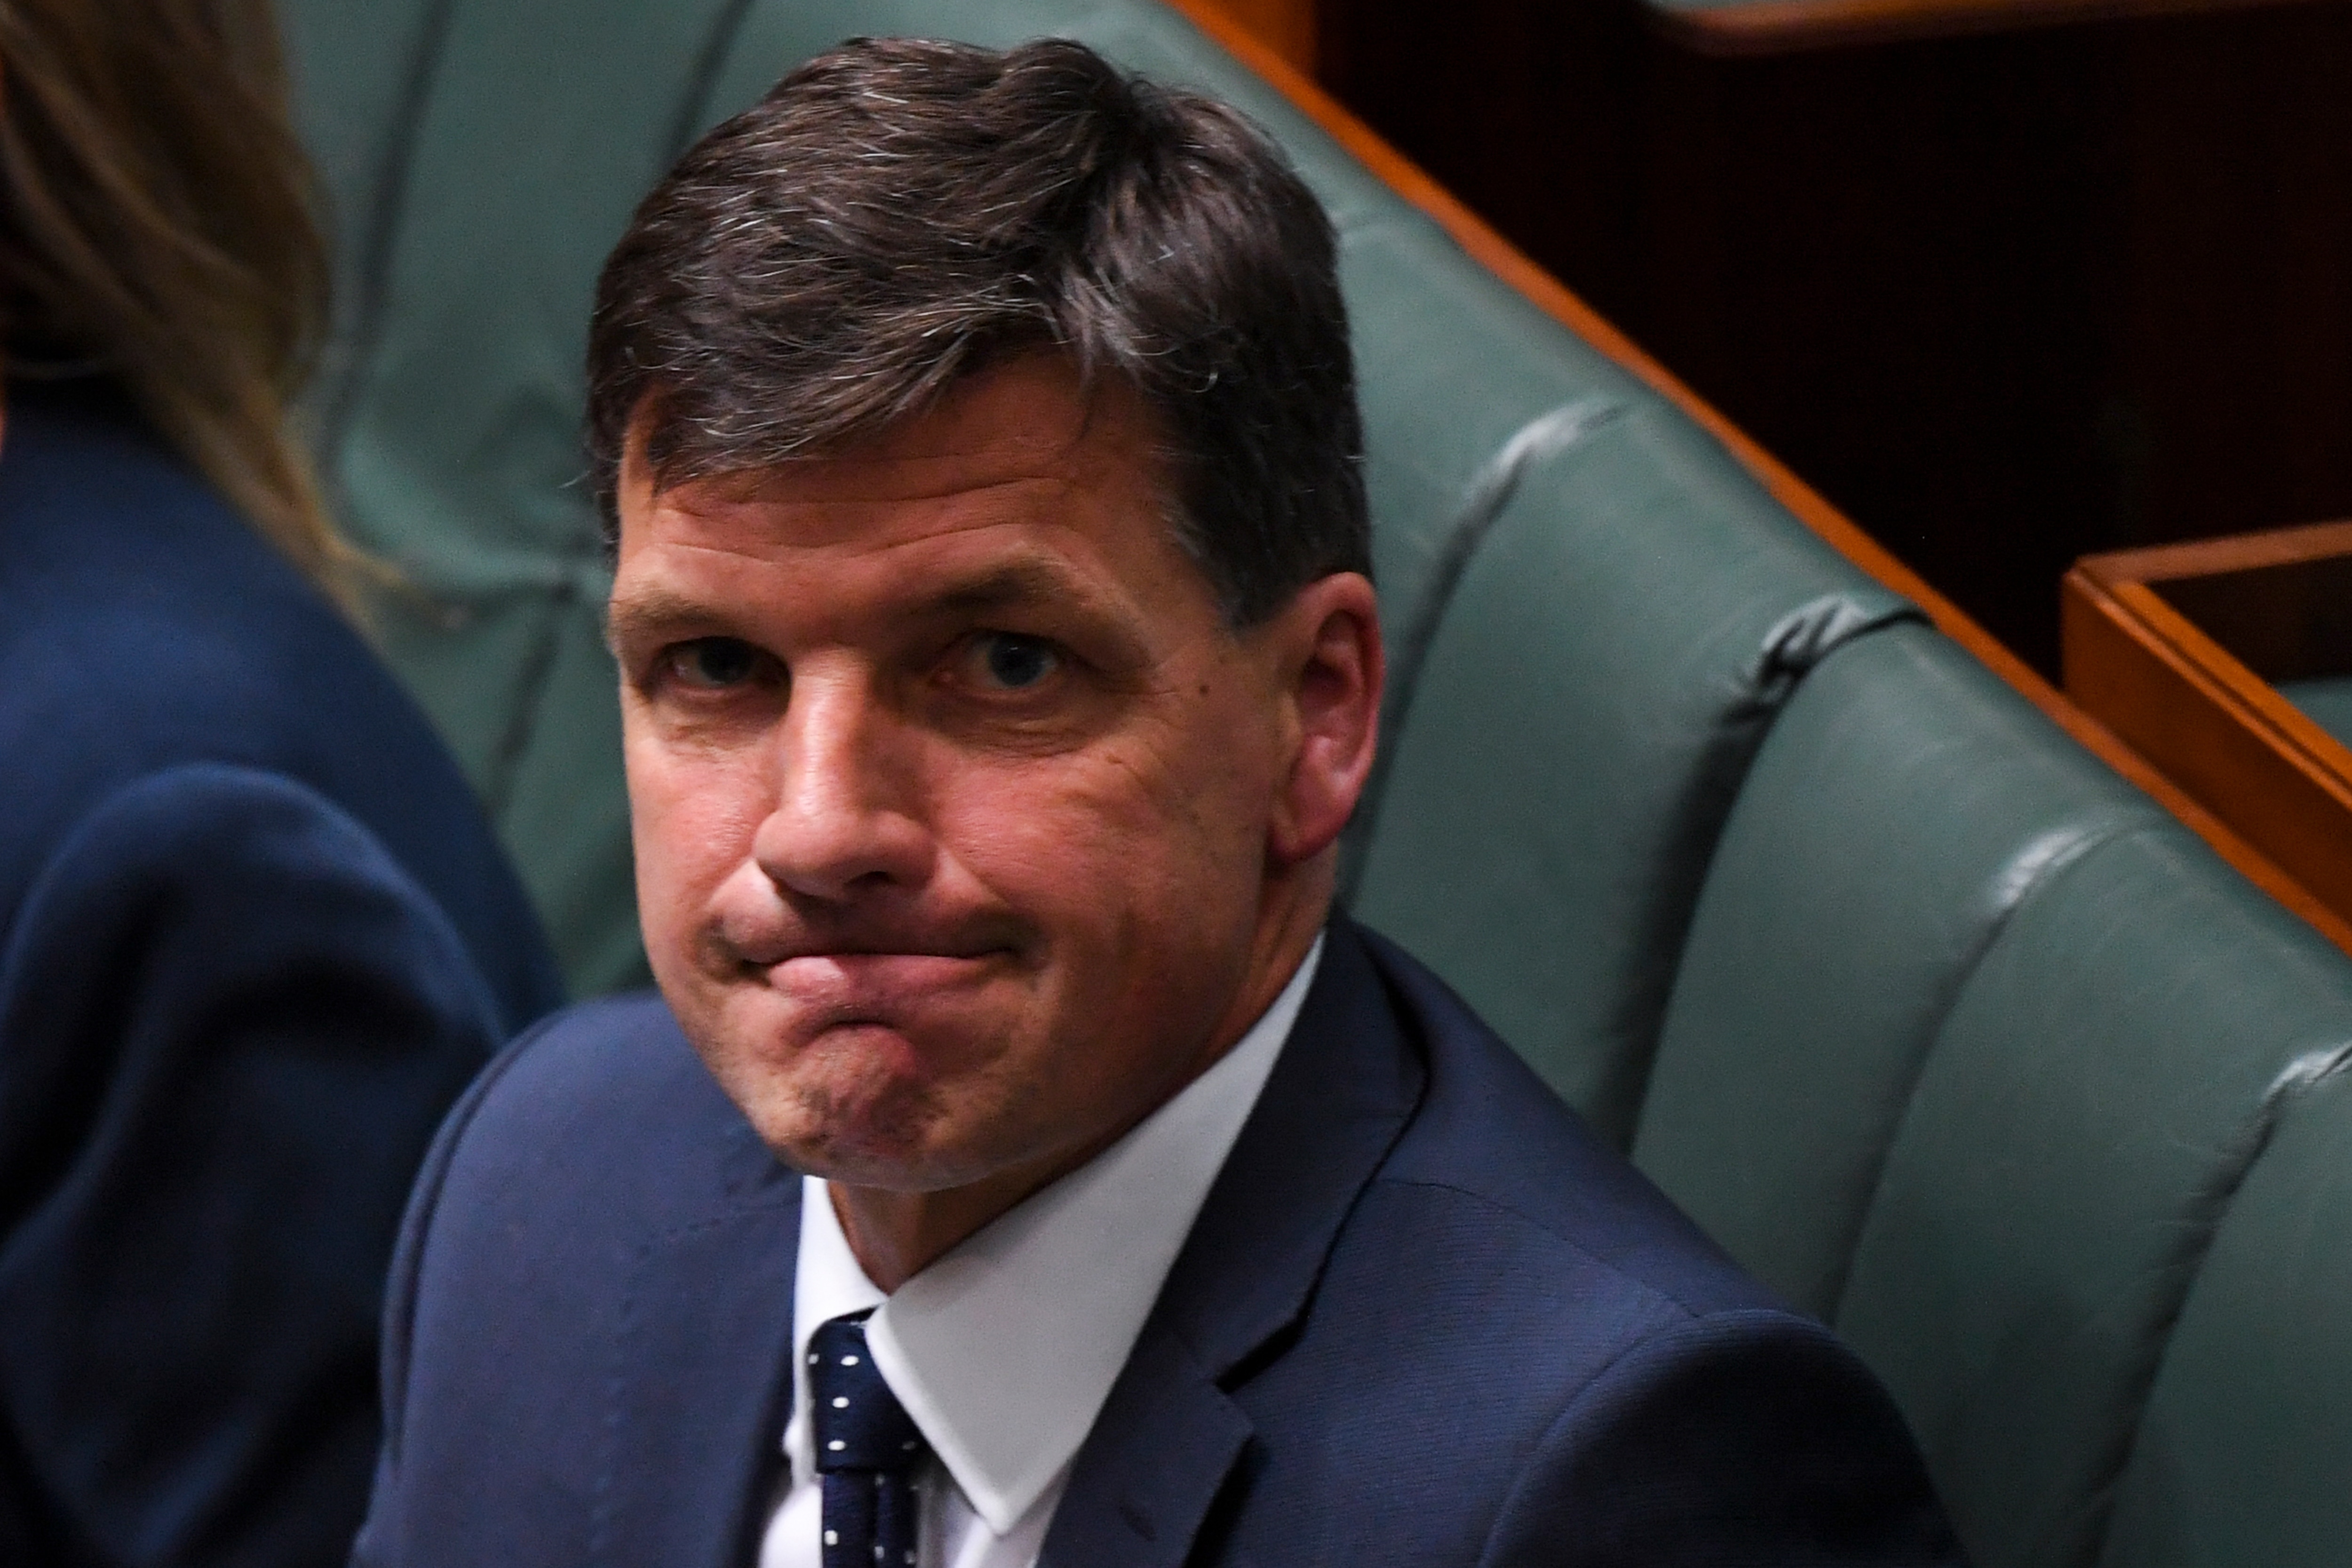 Australian Energy Minister Angus Taylor reacts during House of Representatives Question Time at Parliament House in Canberra, Tuesday, November 26, 2019. (AAP Image/Lukas Coch) NO ARCHIVING